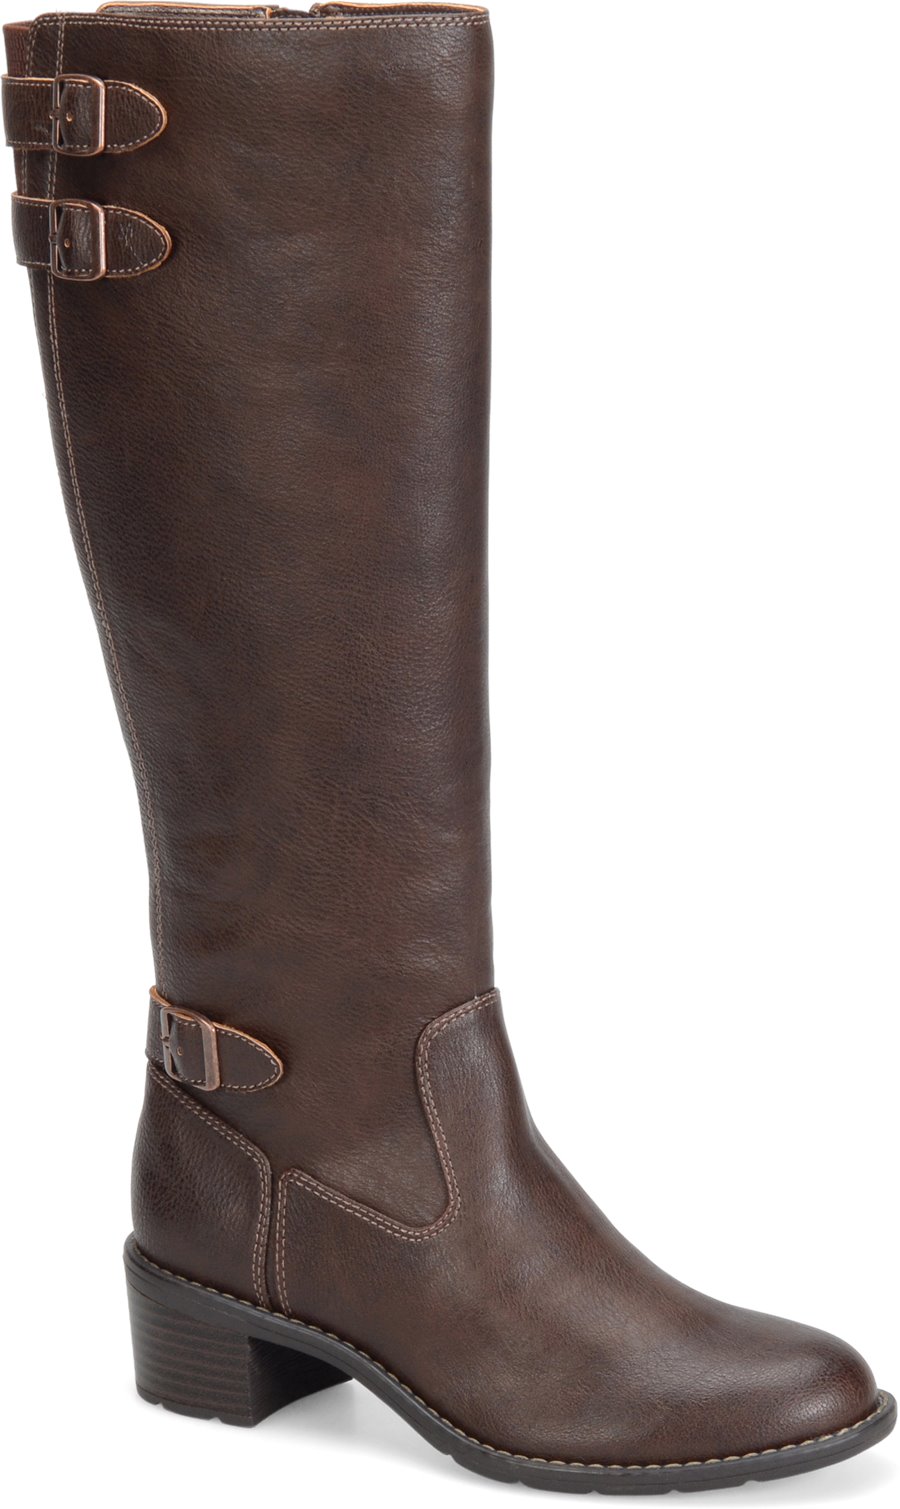 Softspots Carter in Dark Brown - Softspots Womens Boots on Shoeline.com